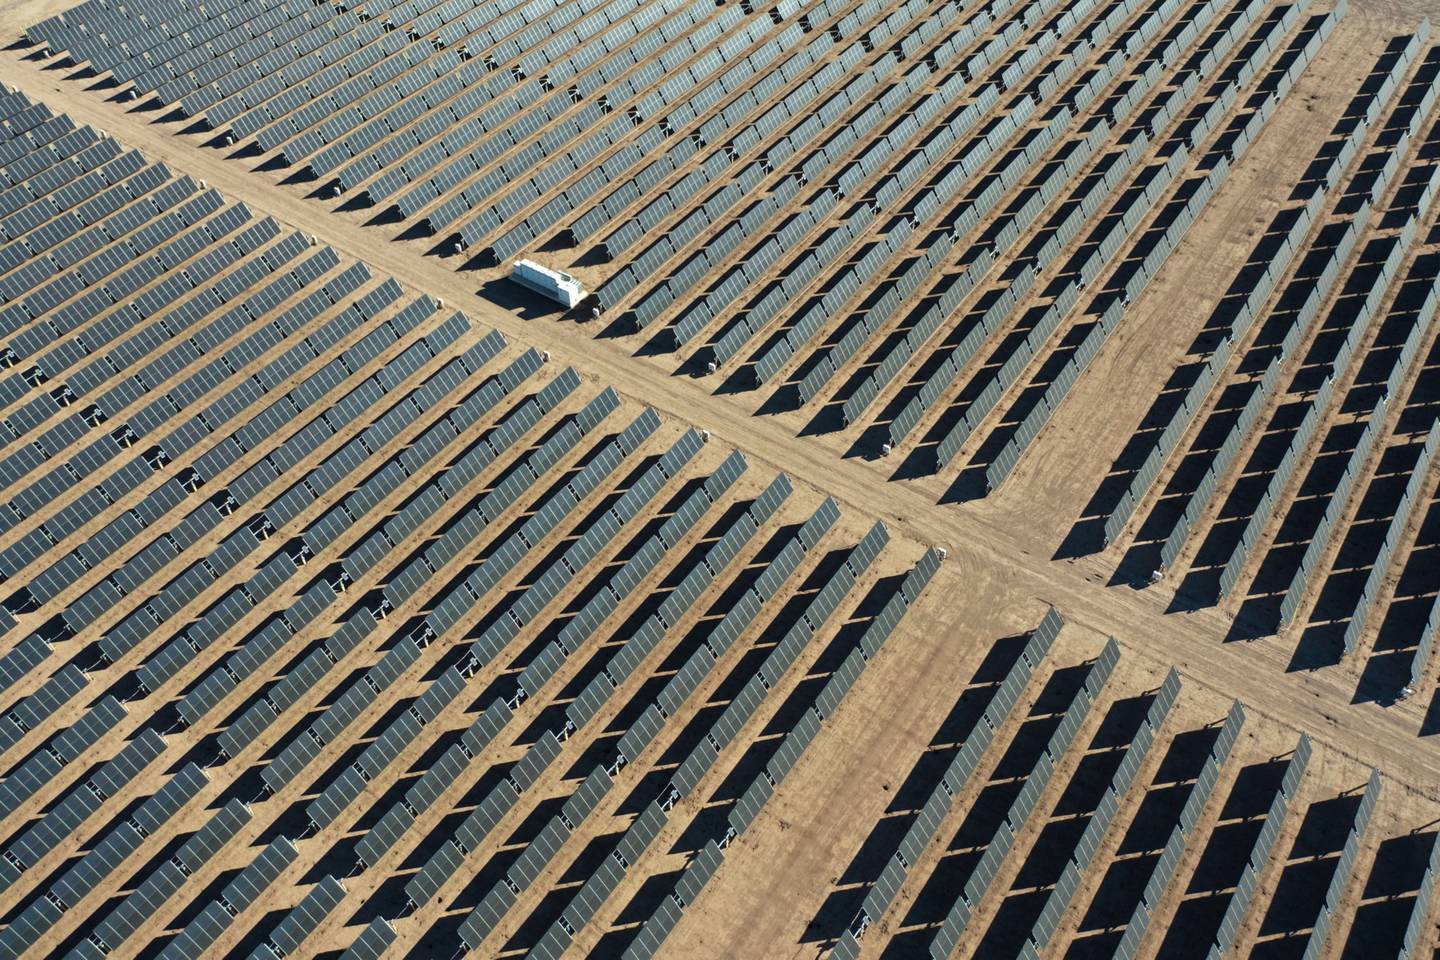 Photovoltaic panels at the Midway I Solar Farm, part of the 107-MW Midway Solar Farm, in Calipatria, California.